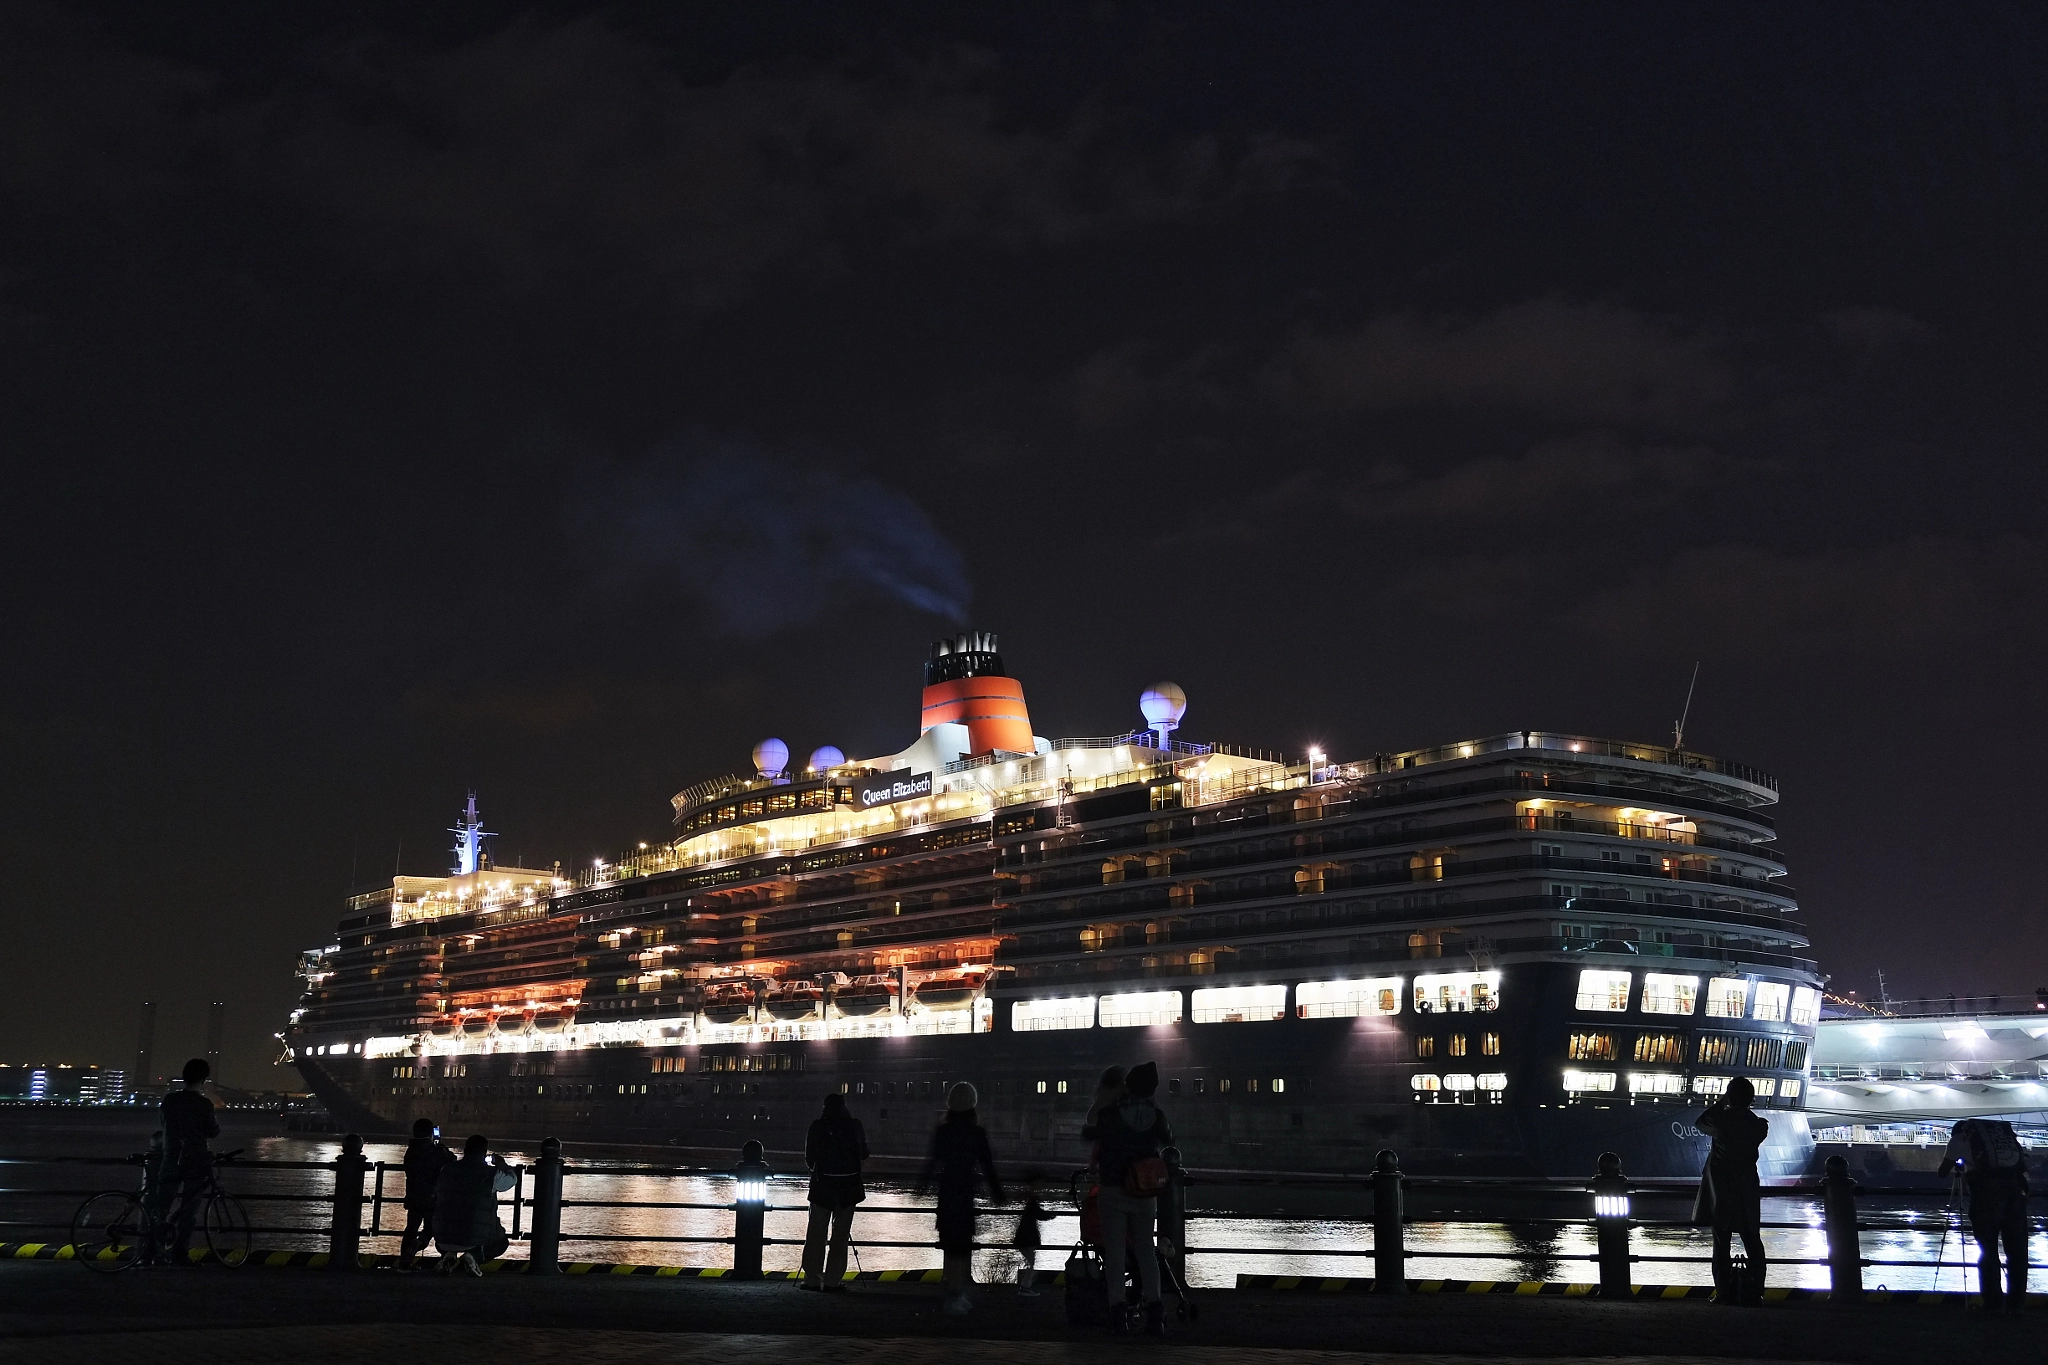 Peaple who see off : Queen Elizabeth at the Port of Yokohama